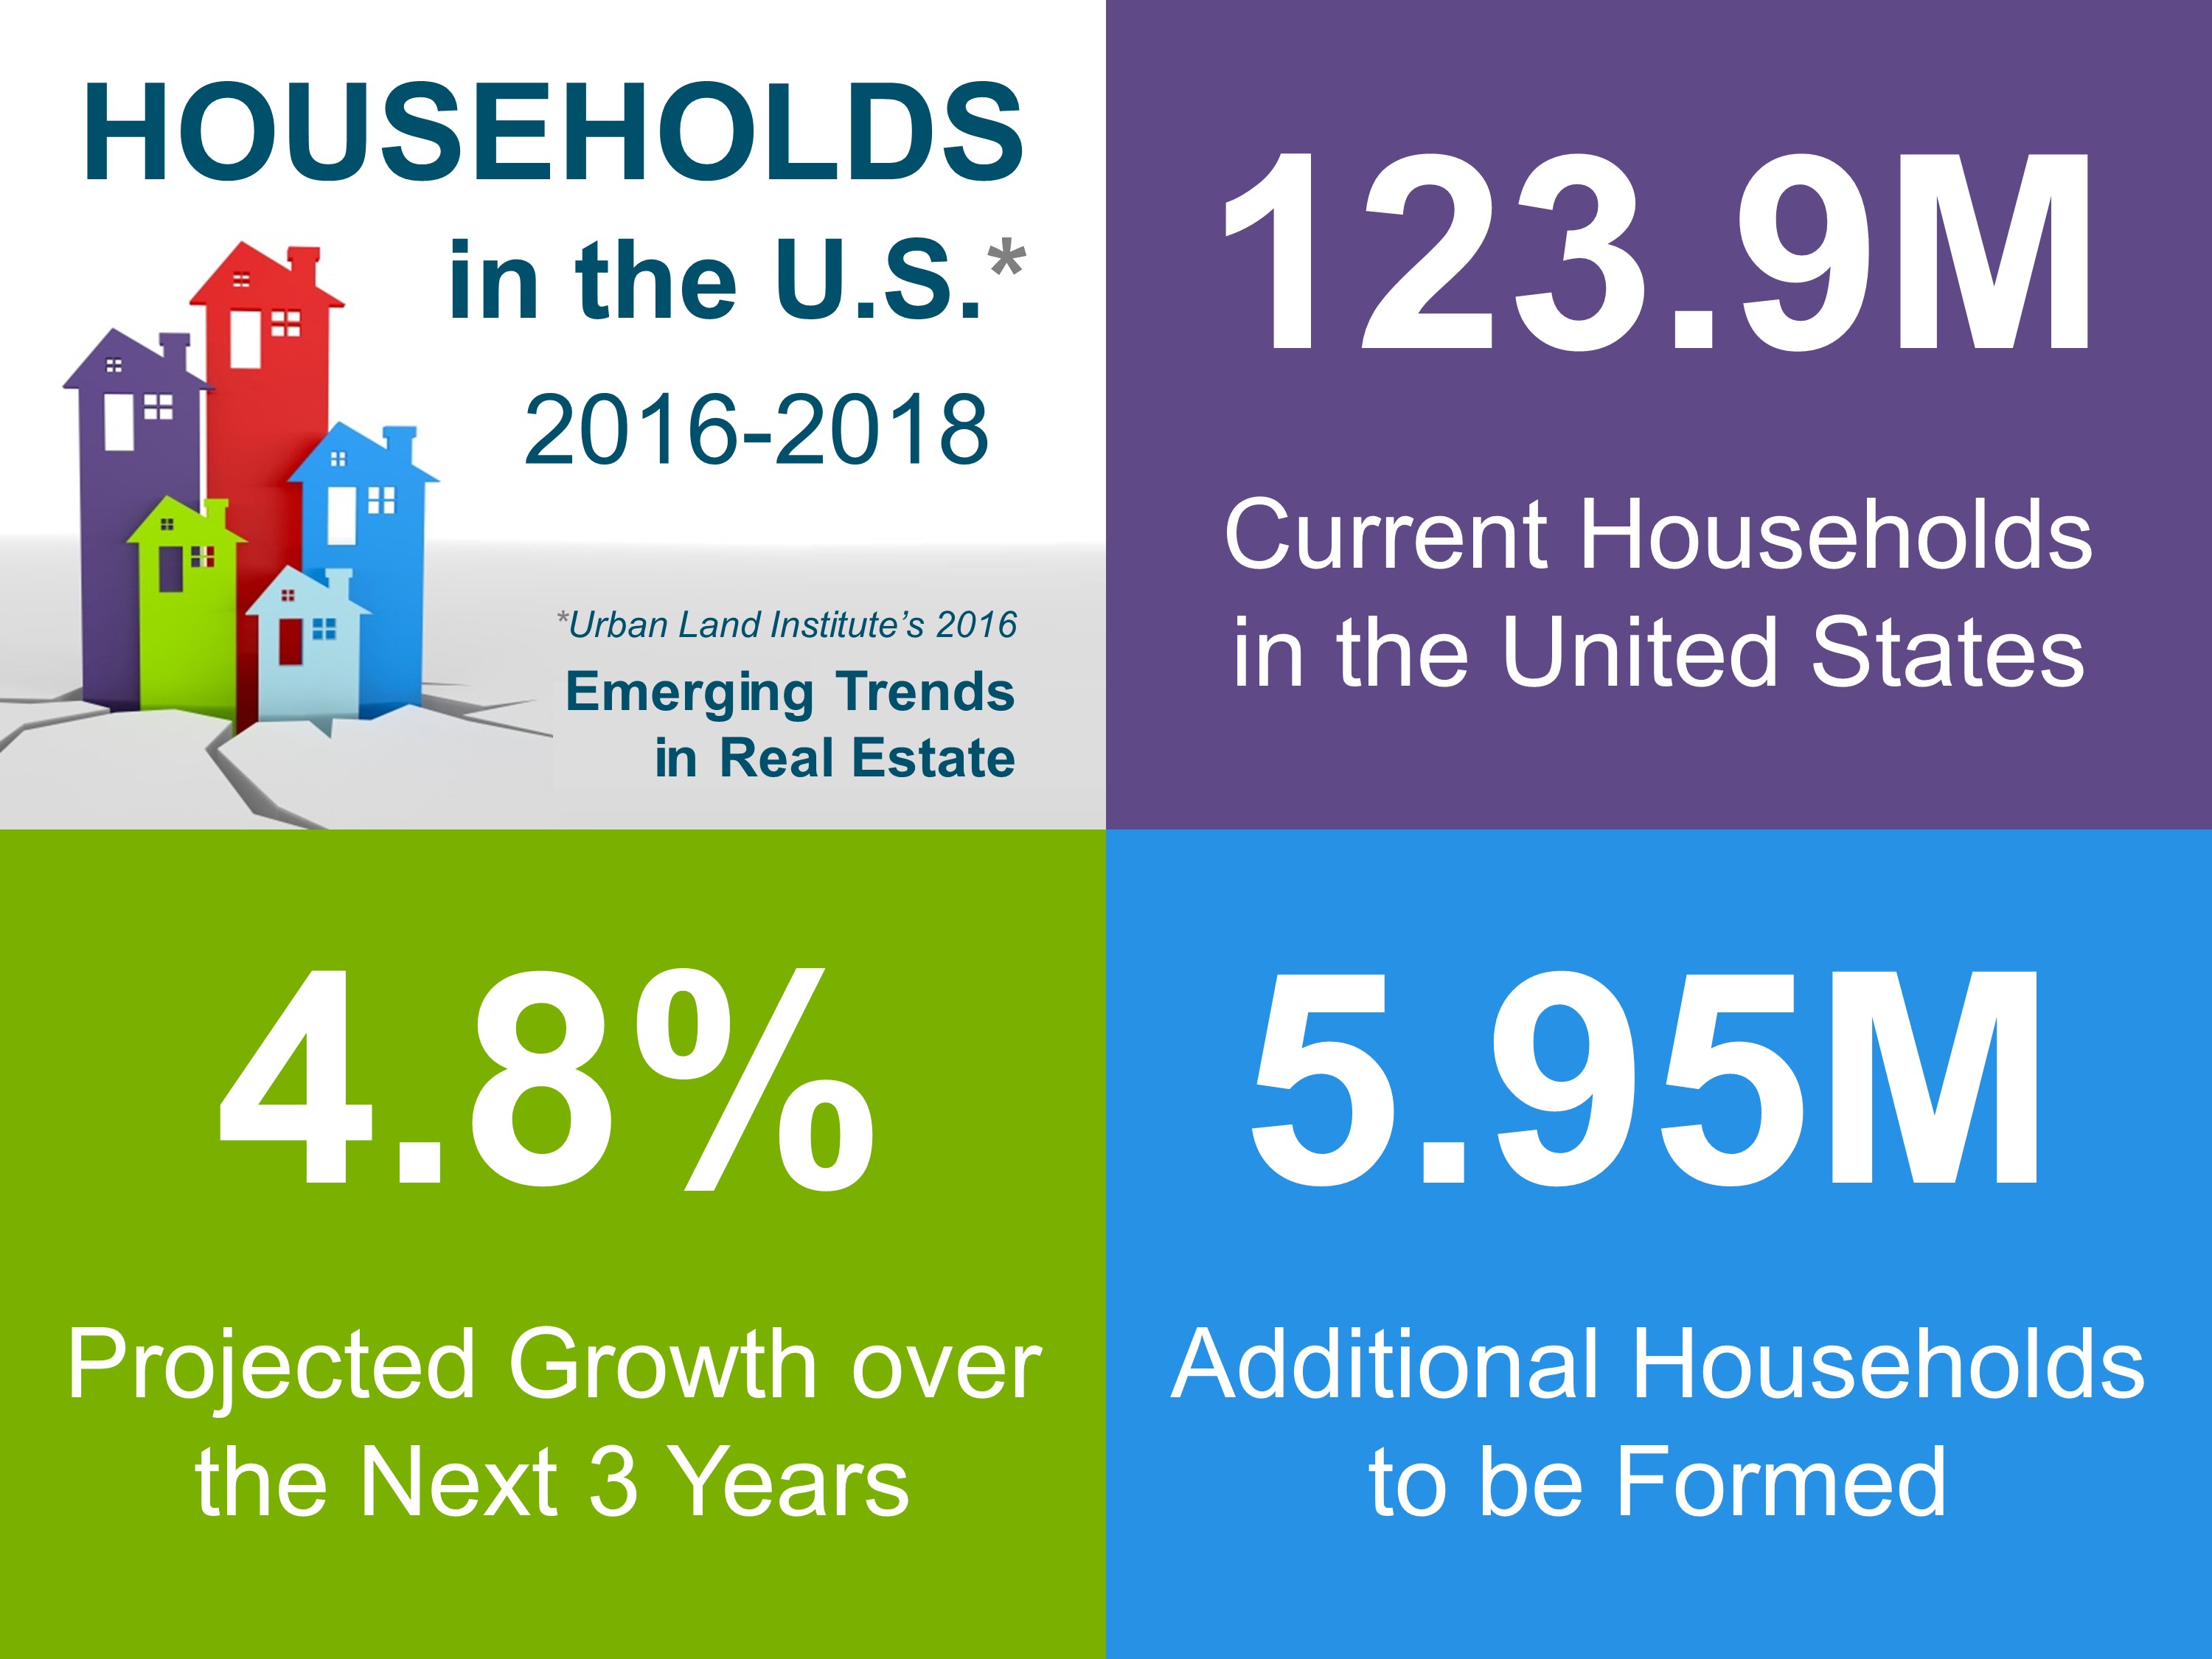 household growth in the us forecast 2016 to 2018